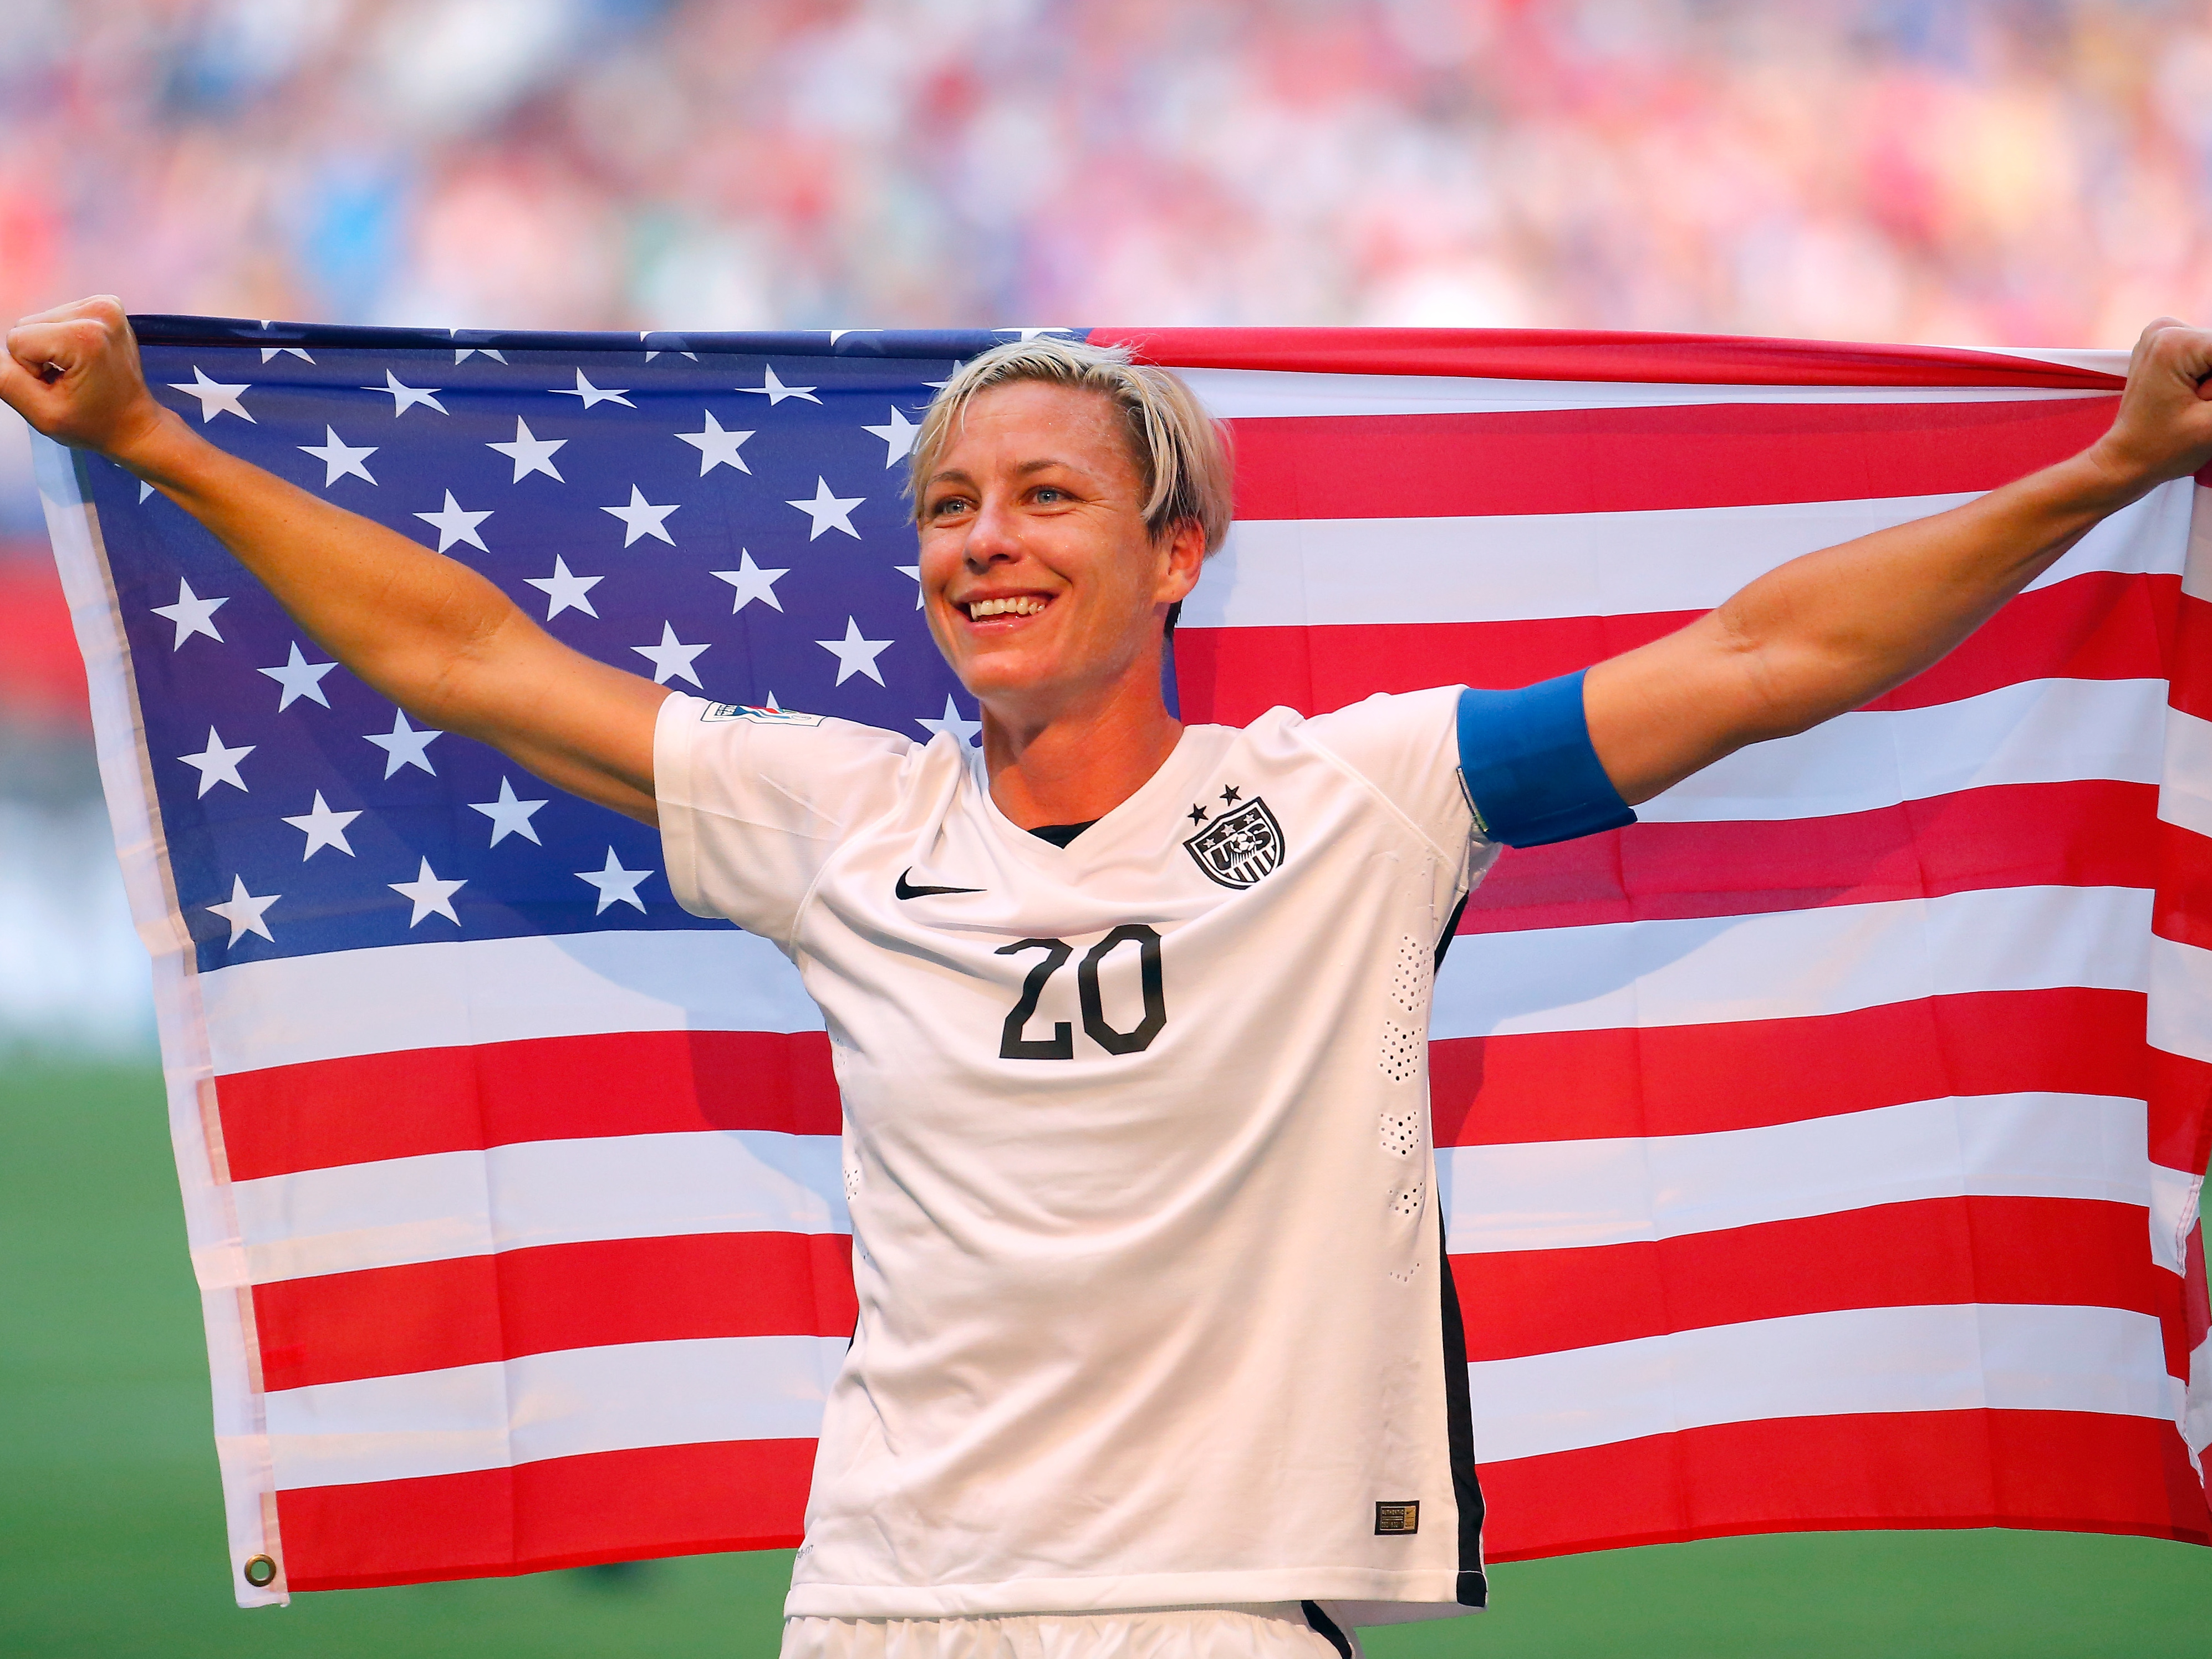 A blonde woman smiling and holding American flag